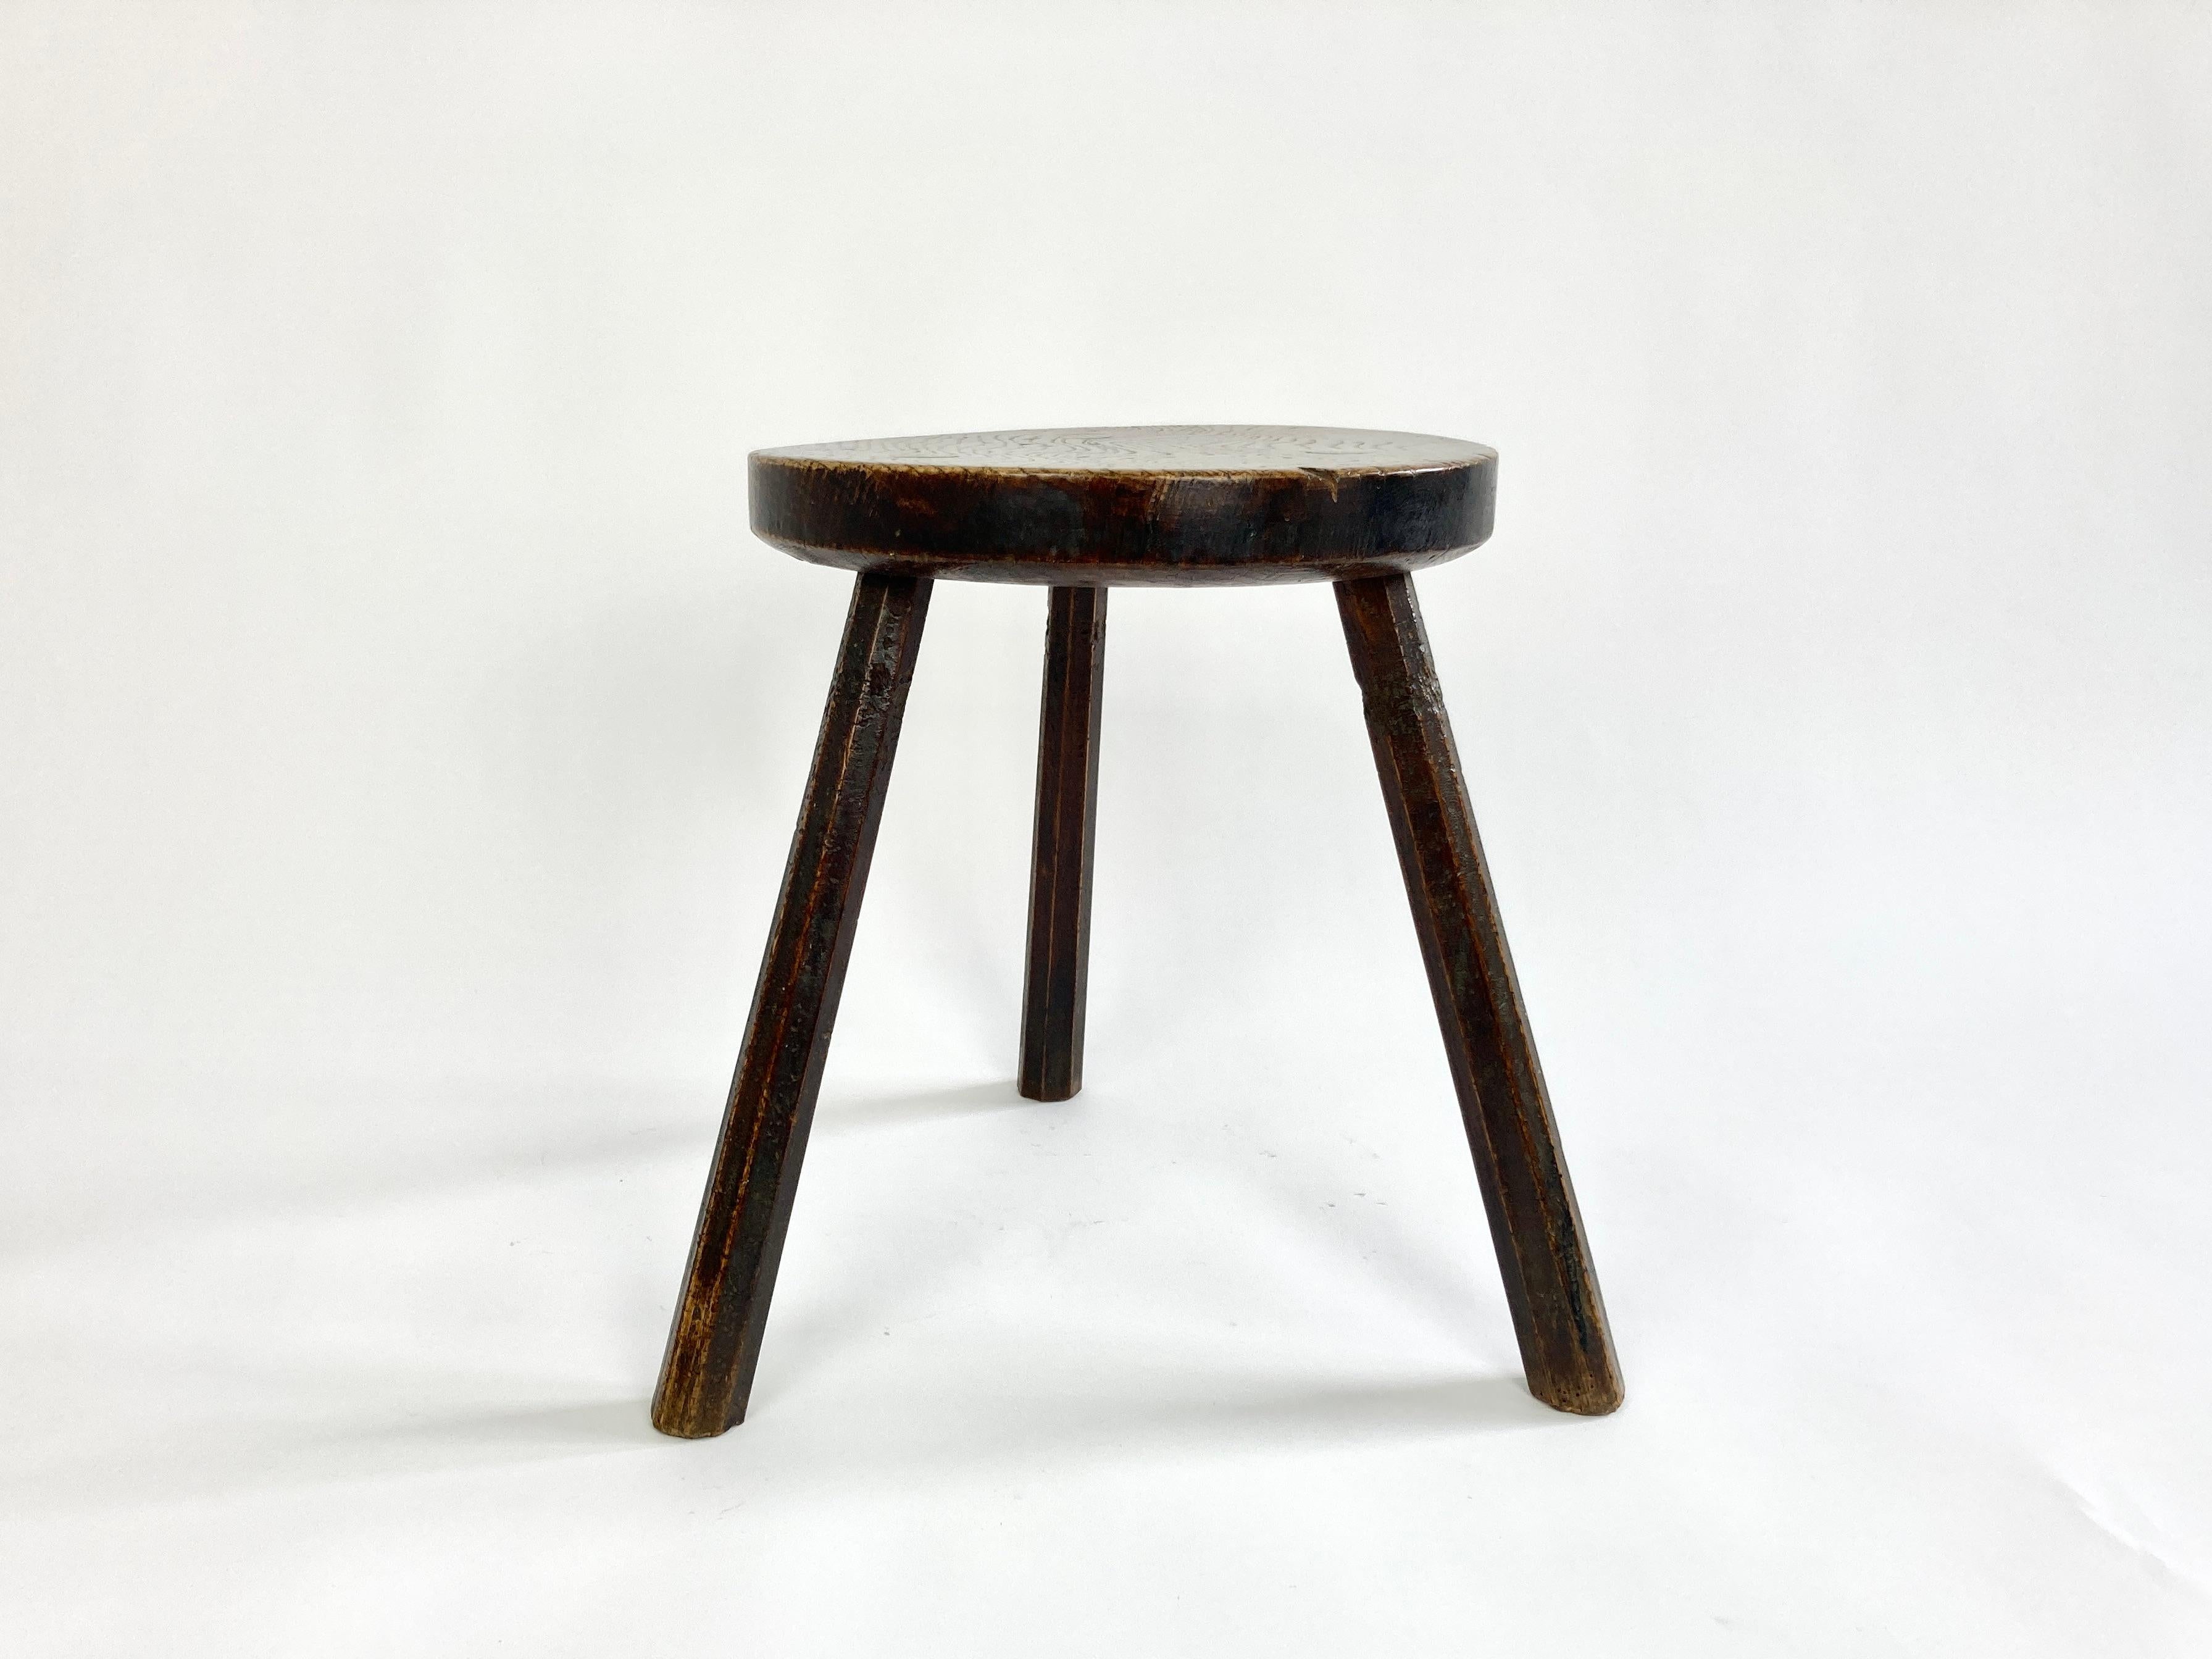 Rustic tripod stool made of elm dating from the late 19th / early 20th century.

Acquired from a small farm in South West Wales, the previous owner recalls it from her childhood and remembers being told stories about it which go back to at least